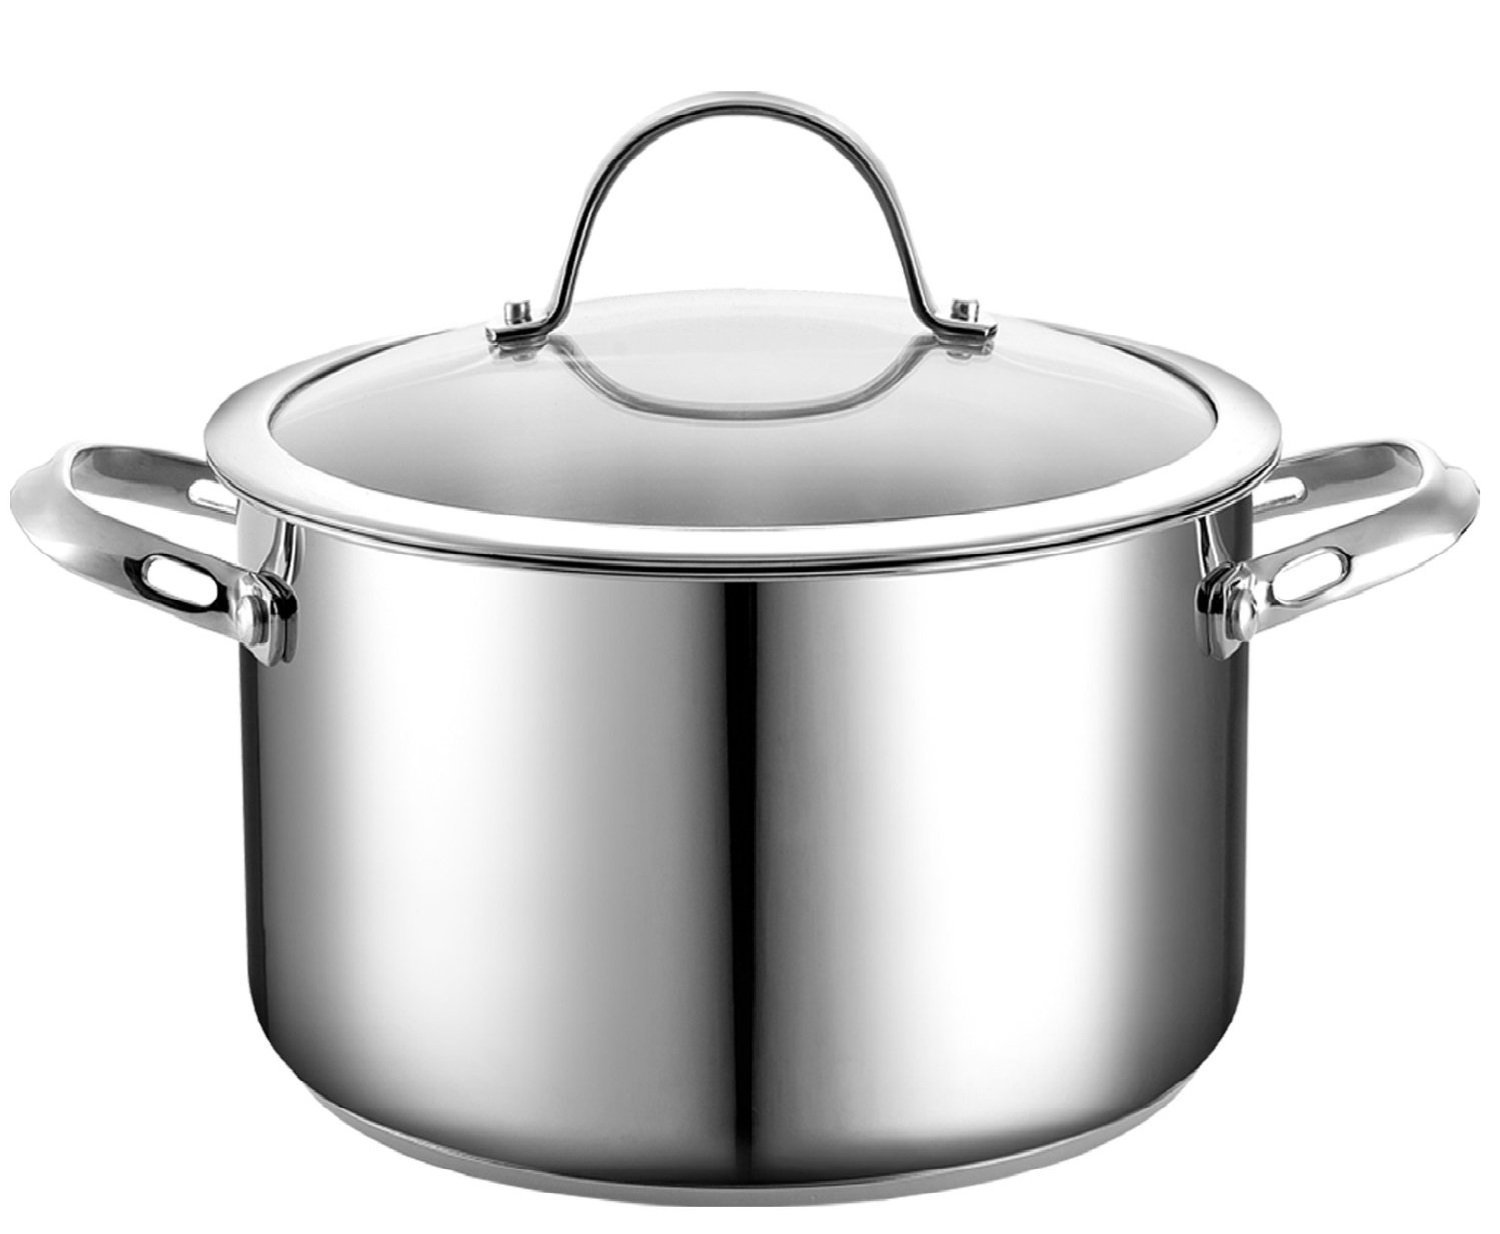 Cooks Standard Stainless Steel Stockpot with Cover, 6-Quart - Stainless Steel Pot